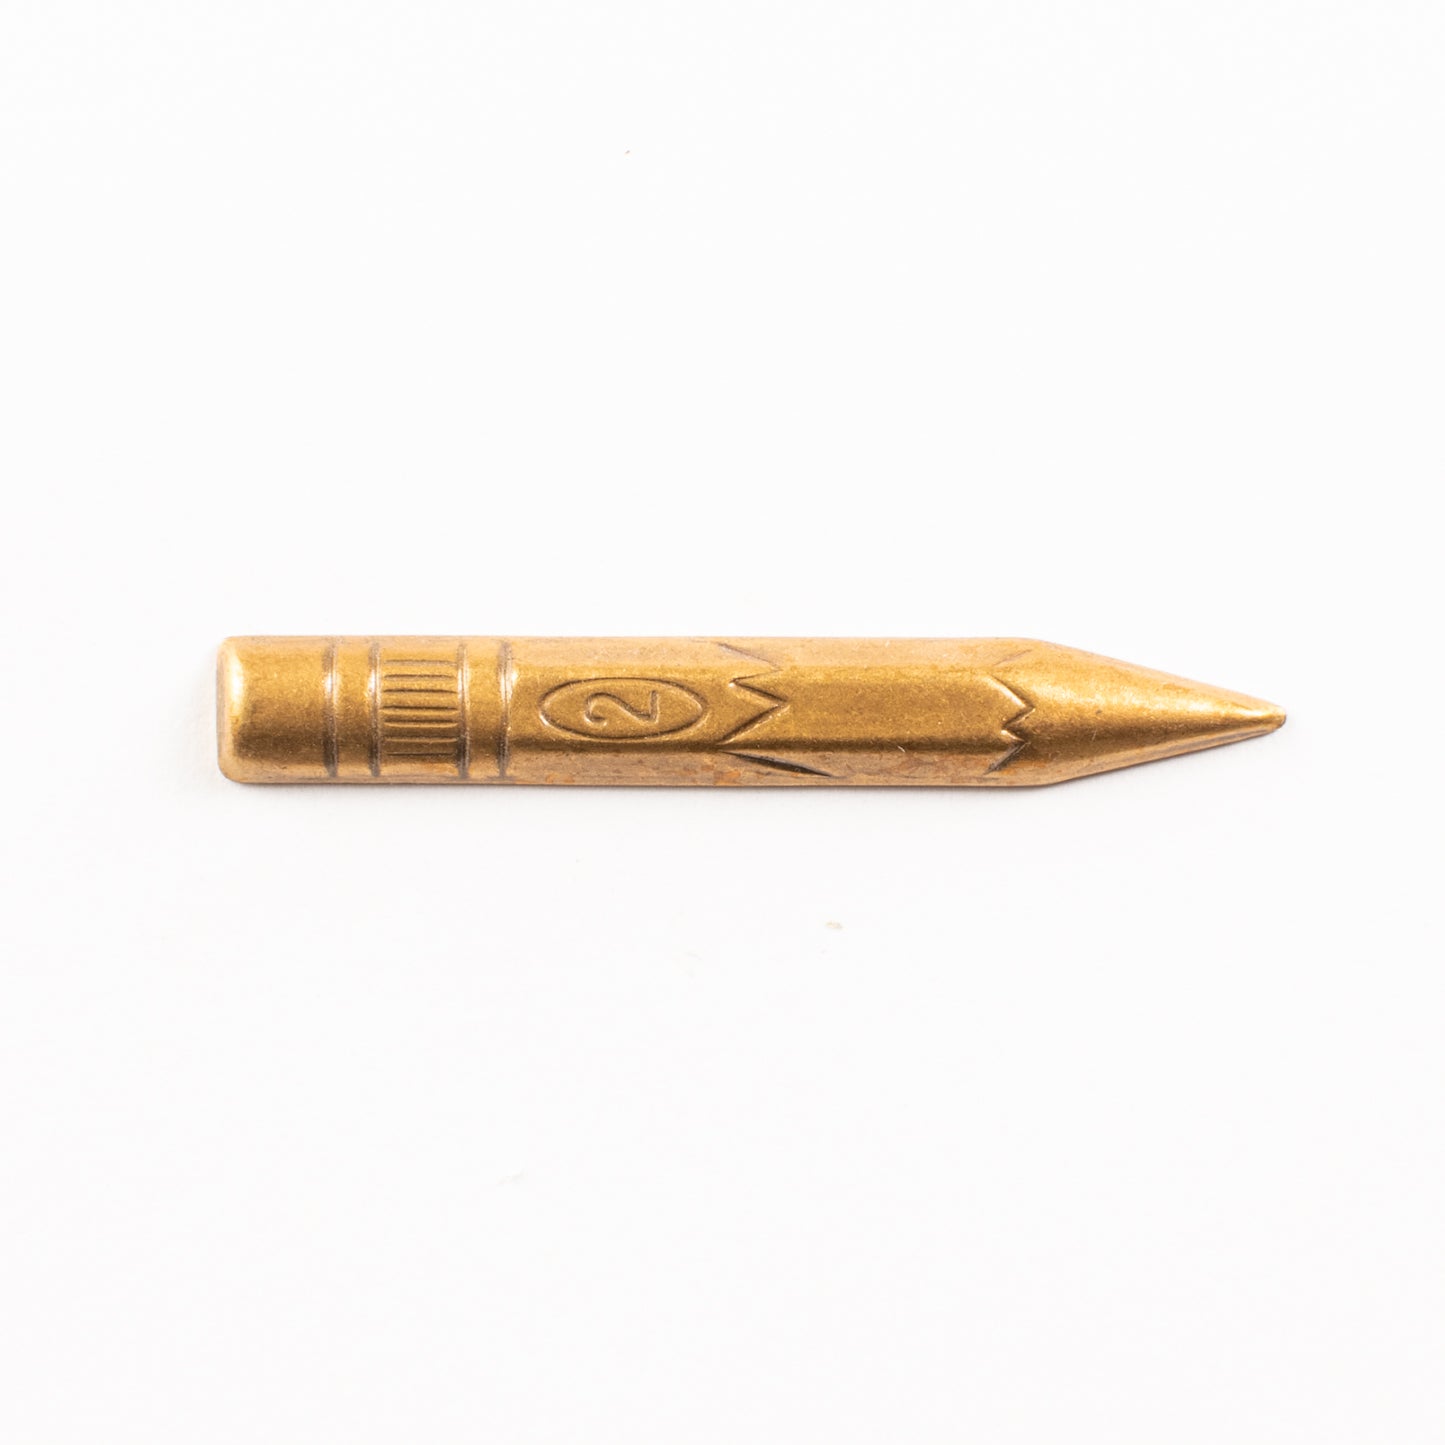 49mm Antique Gold, Classic Silver Finish NO.2 PENCIL charm, each